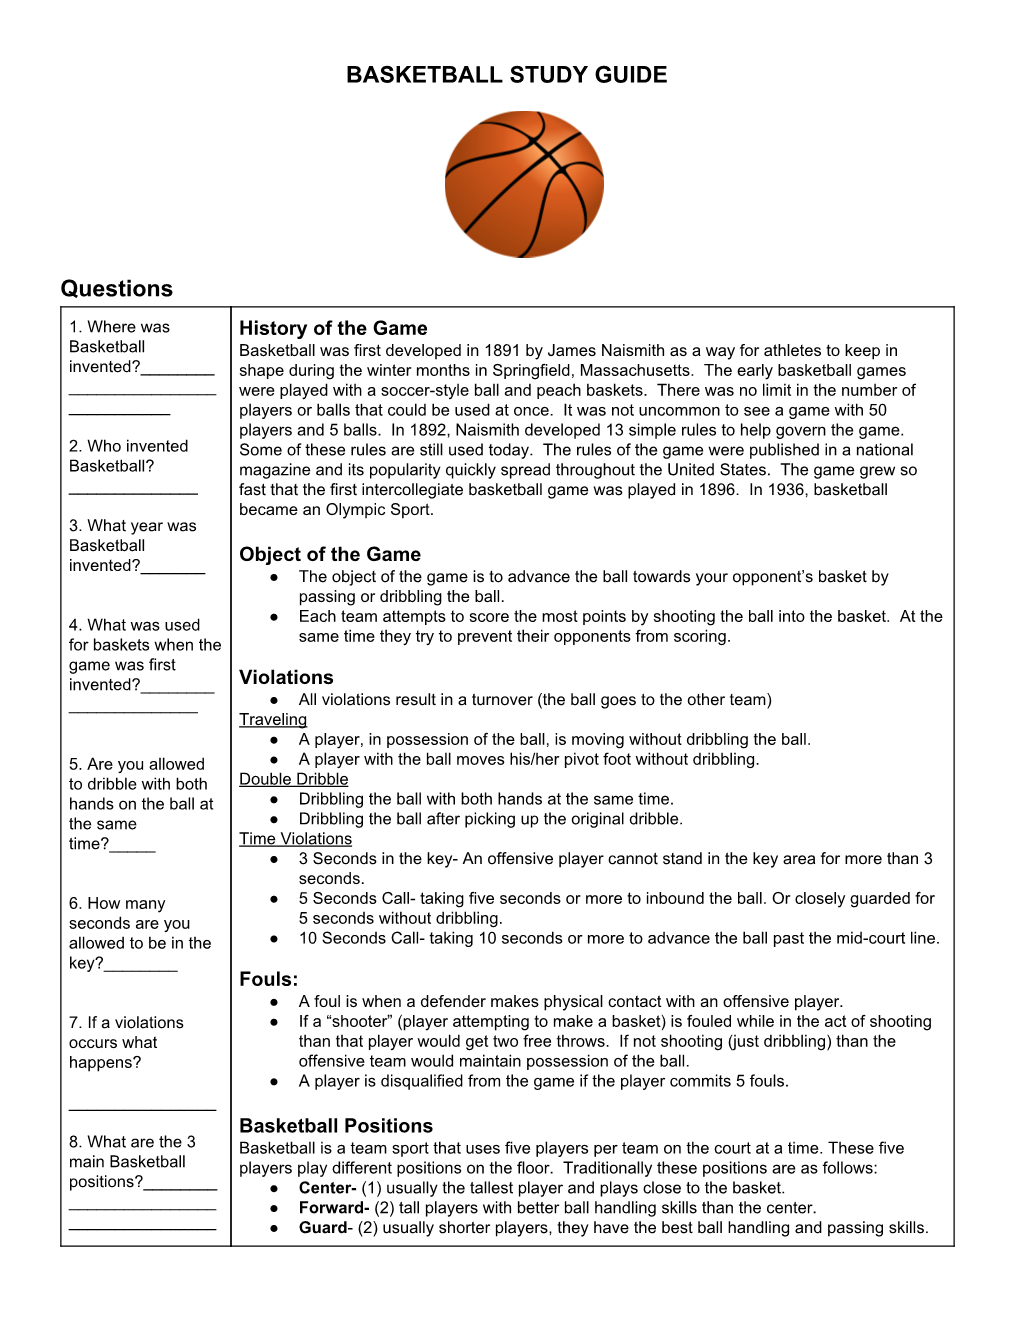 BASKETBALL STUDY GUIDE Questions